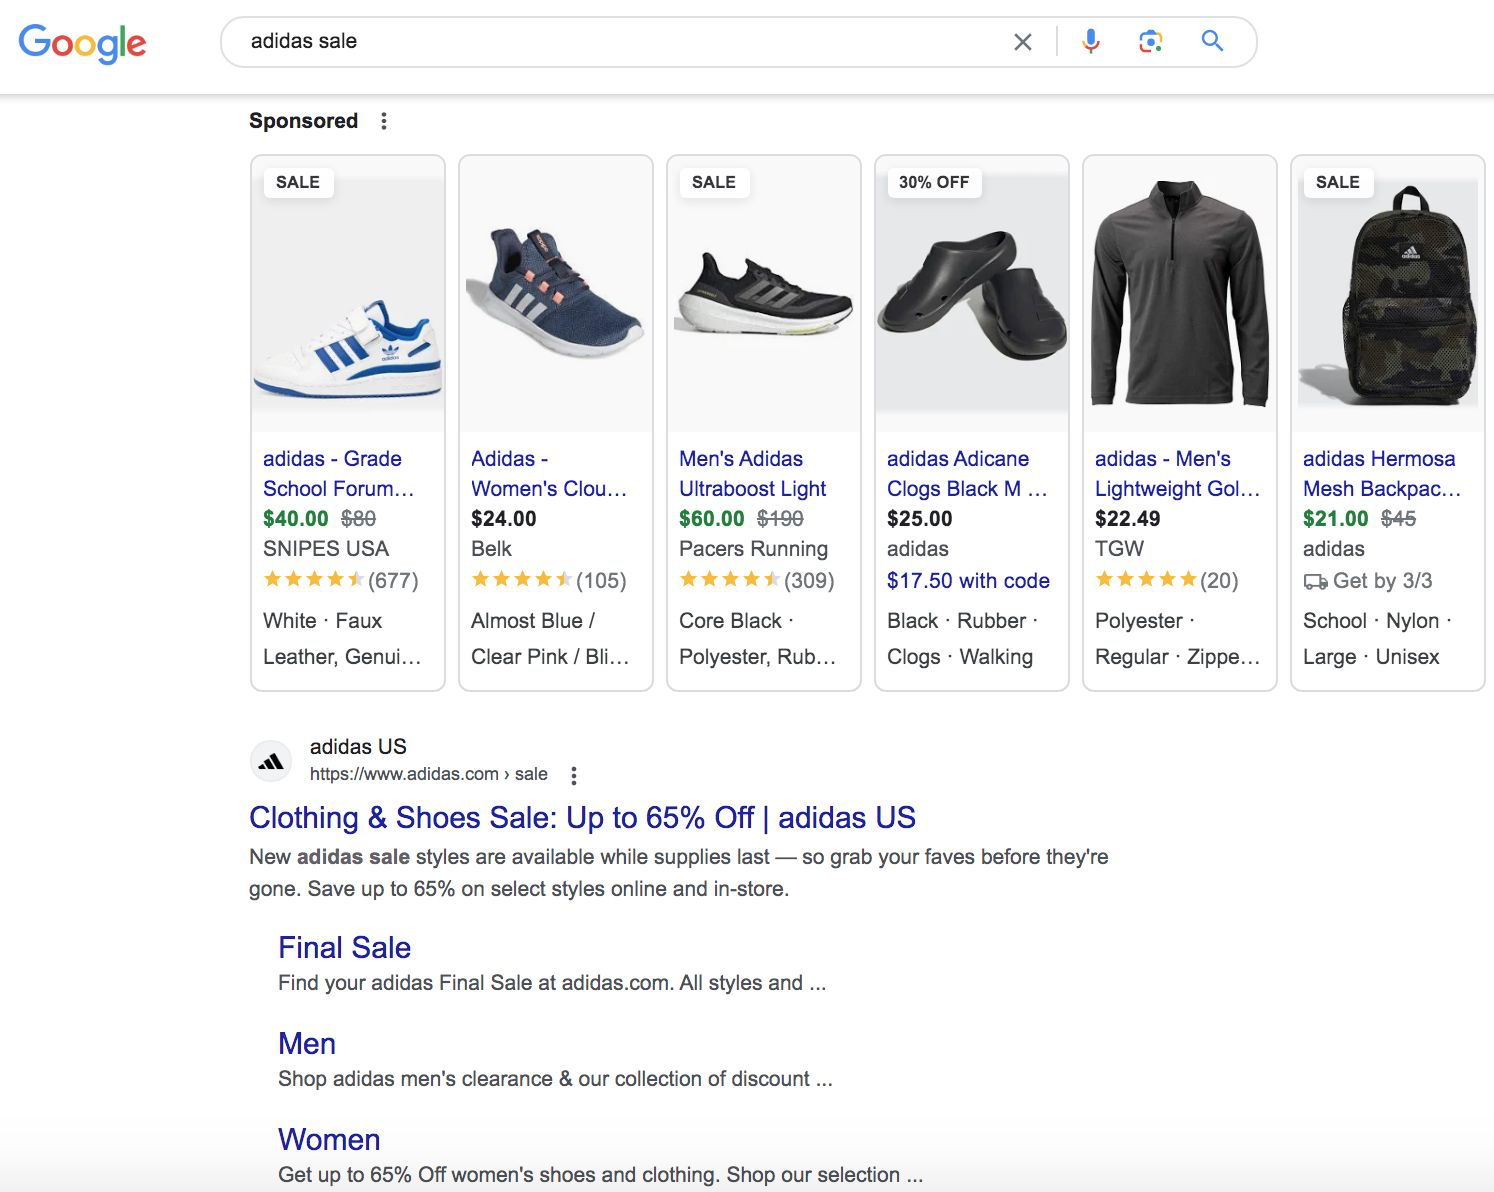 Top of Google's SERP for "adidas" sale query features PLA ads and Adidas' website